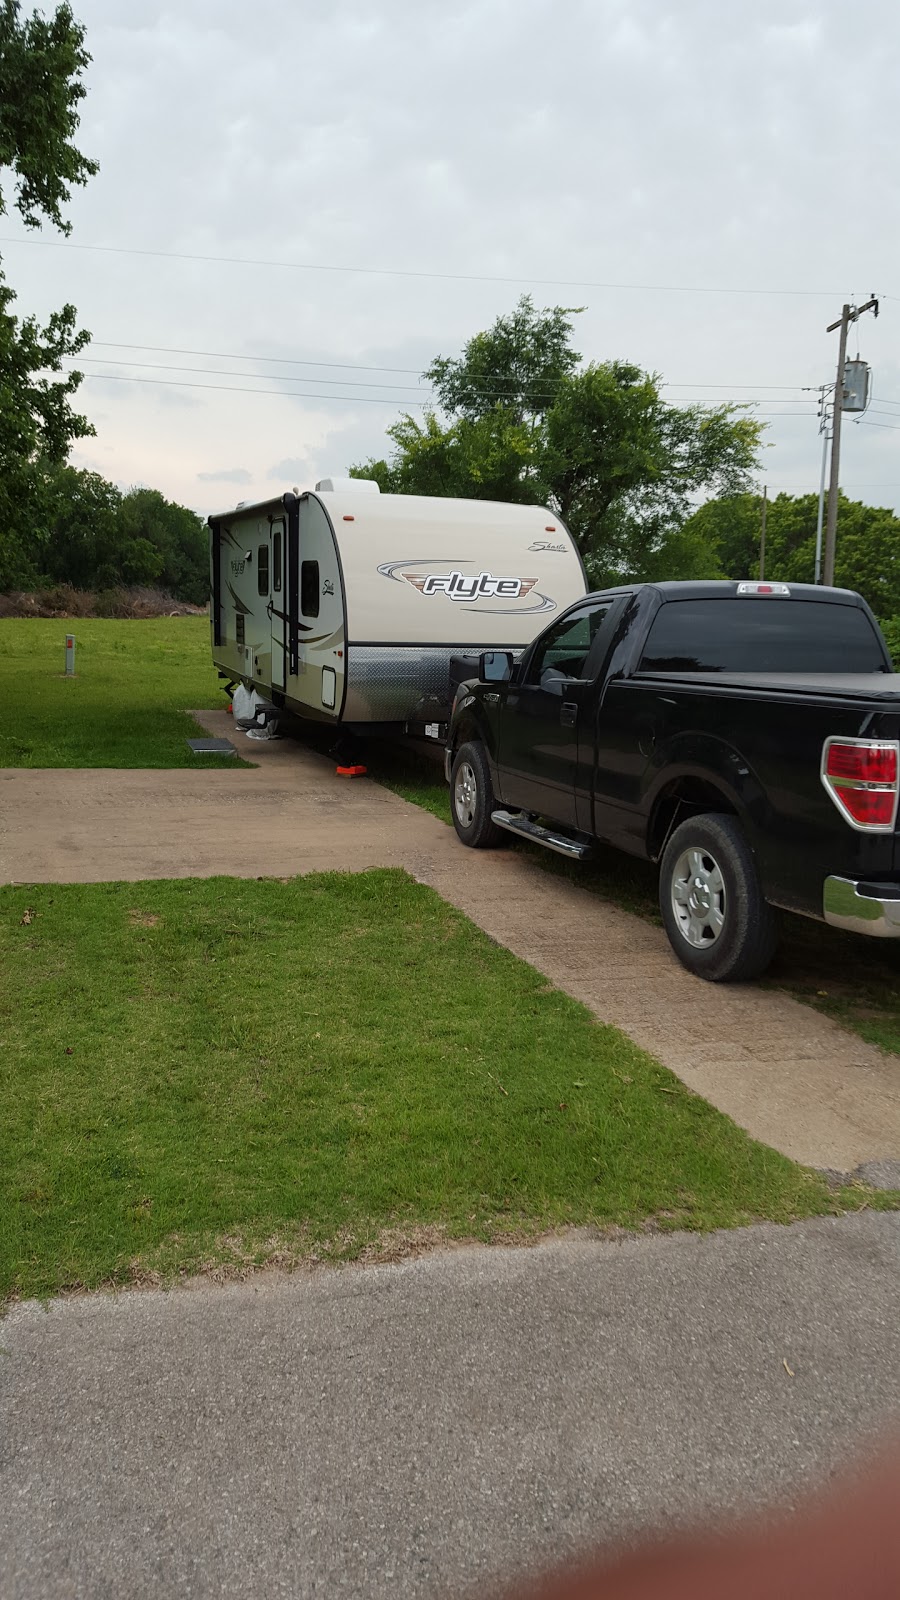 Holliday Outt RV Park 55 Plus | 604 N Mustang Plant Rd, Oklahoma City, OK 73127 | Phone: (405) 470-1614